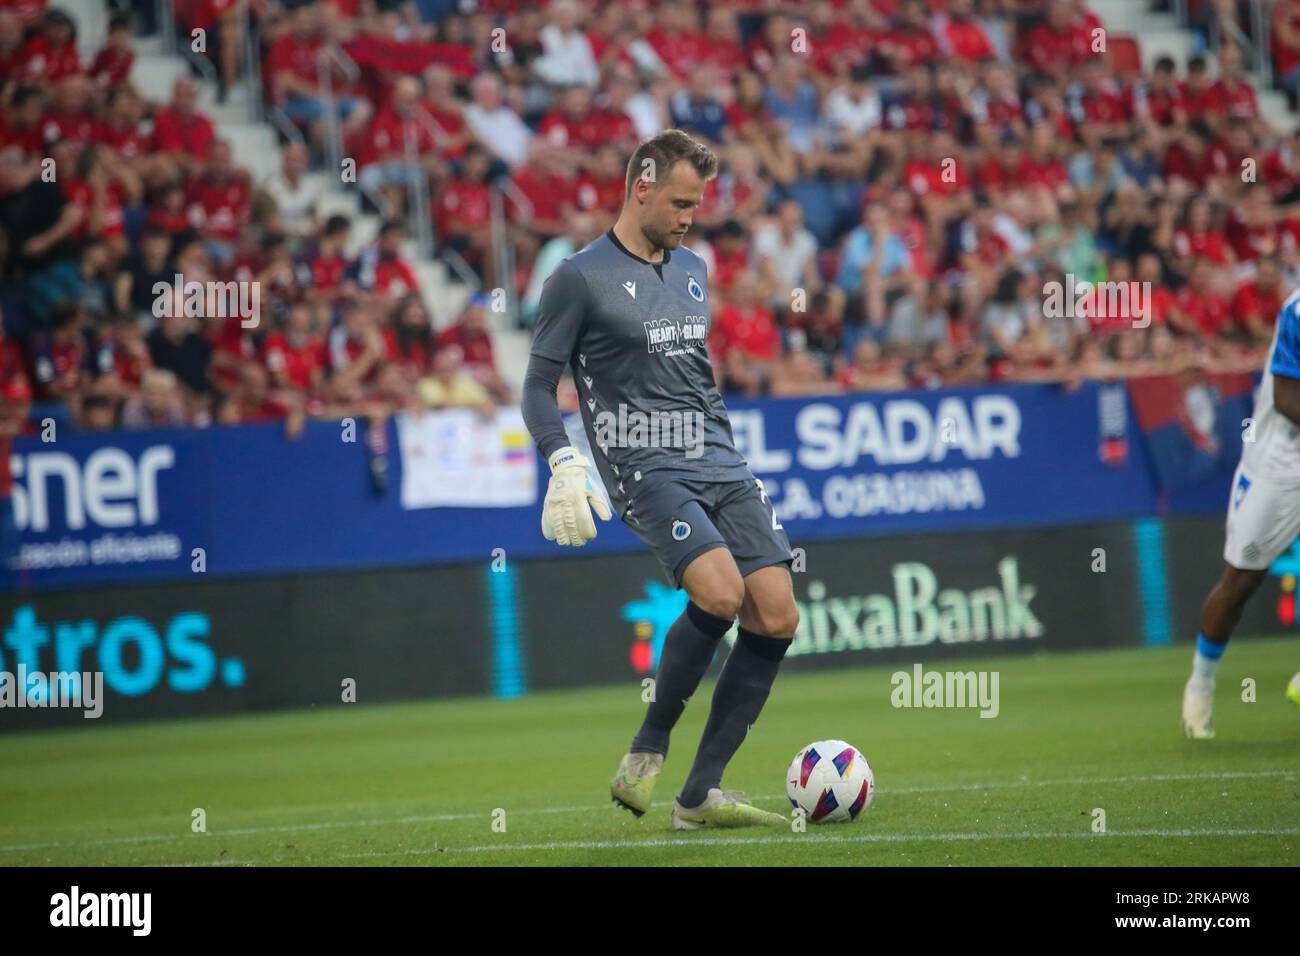 Pamplona, Spain, 24th August, 2023: Club Brugge's goalkeeper Simon Mignolet (22) with the ball during the first leg match of the UEFA Europa Conference League 2023-24 Preliminary Round between CA Osasuna and Club Brugge in the El Sadar Stadium, in Pamplona, on August 24, 2023. Credit: Alberto Brevers / Alamy Live News. Stock Photo